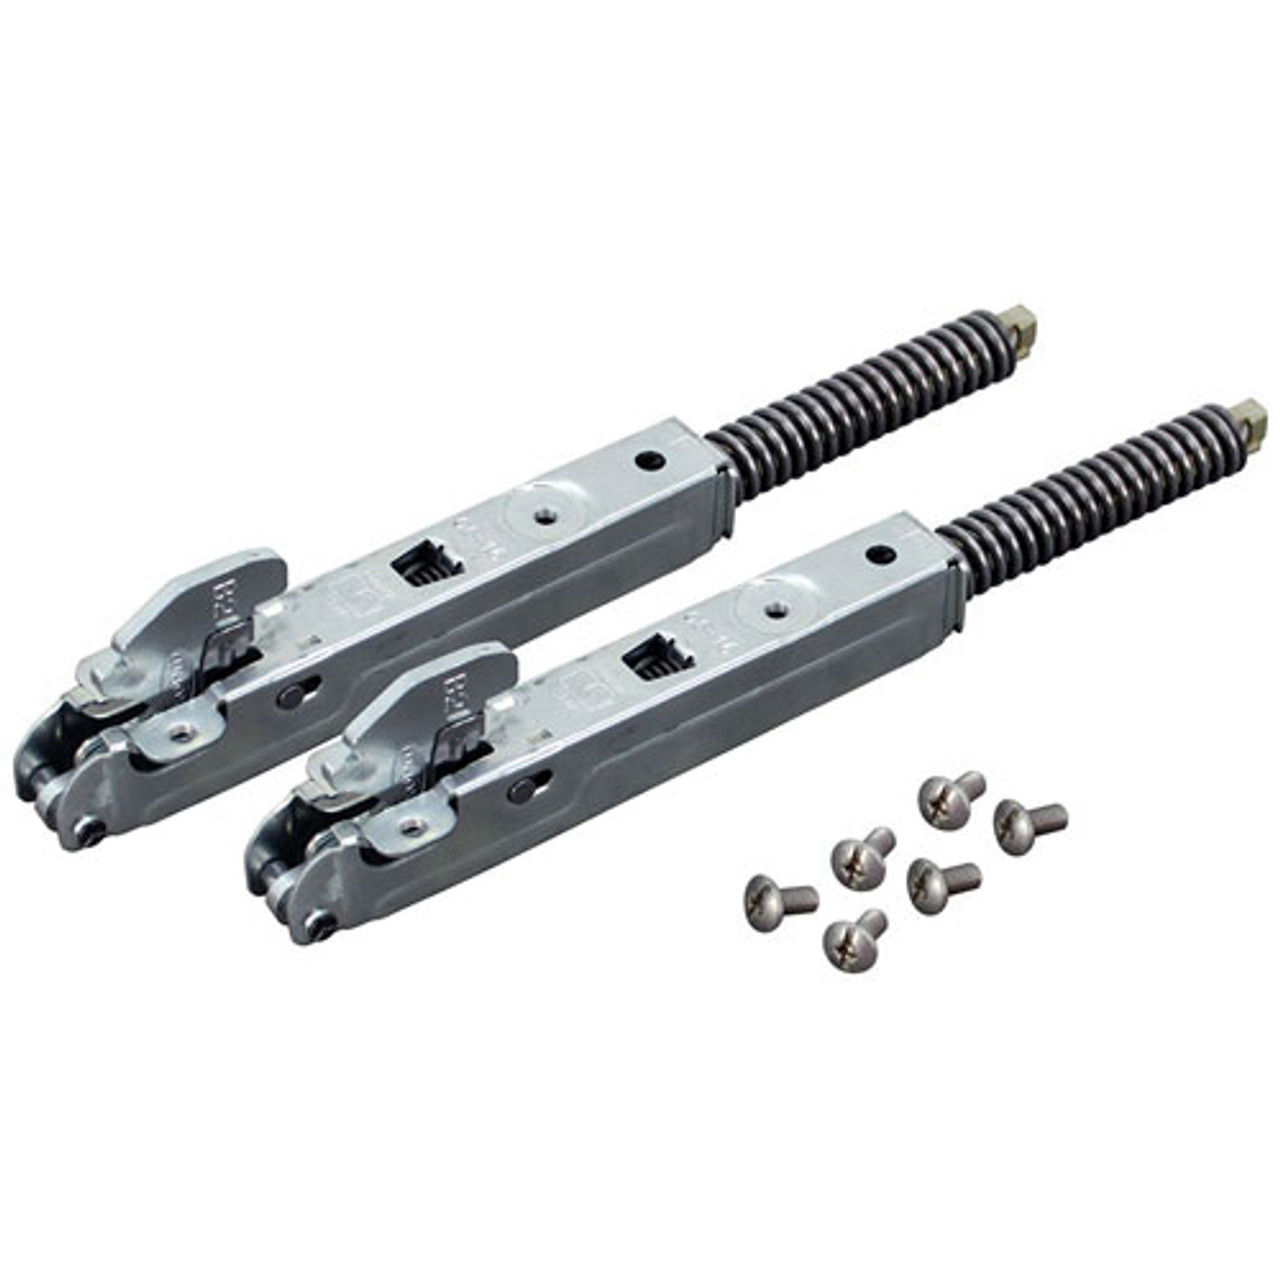 Caddy CCR1060A0 - Hinge Kit